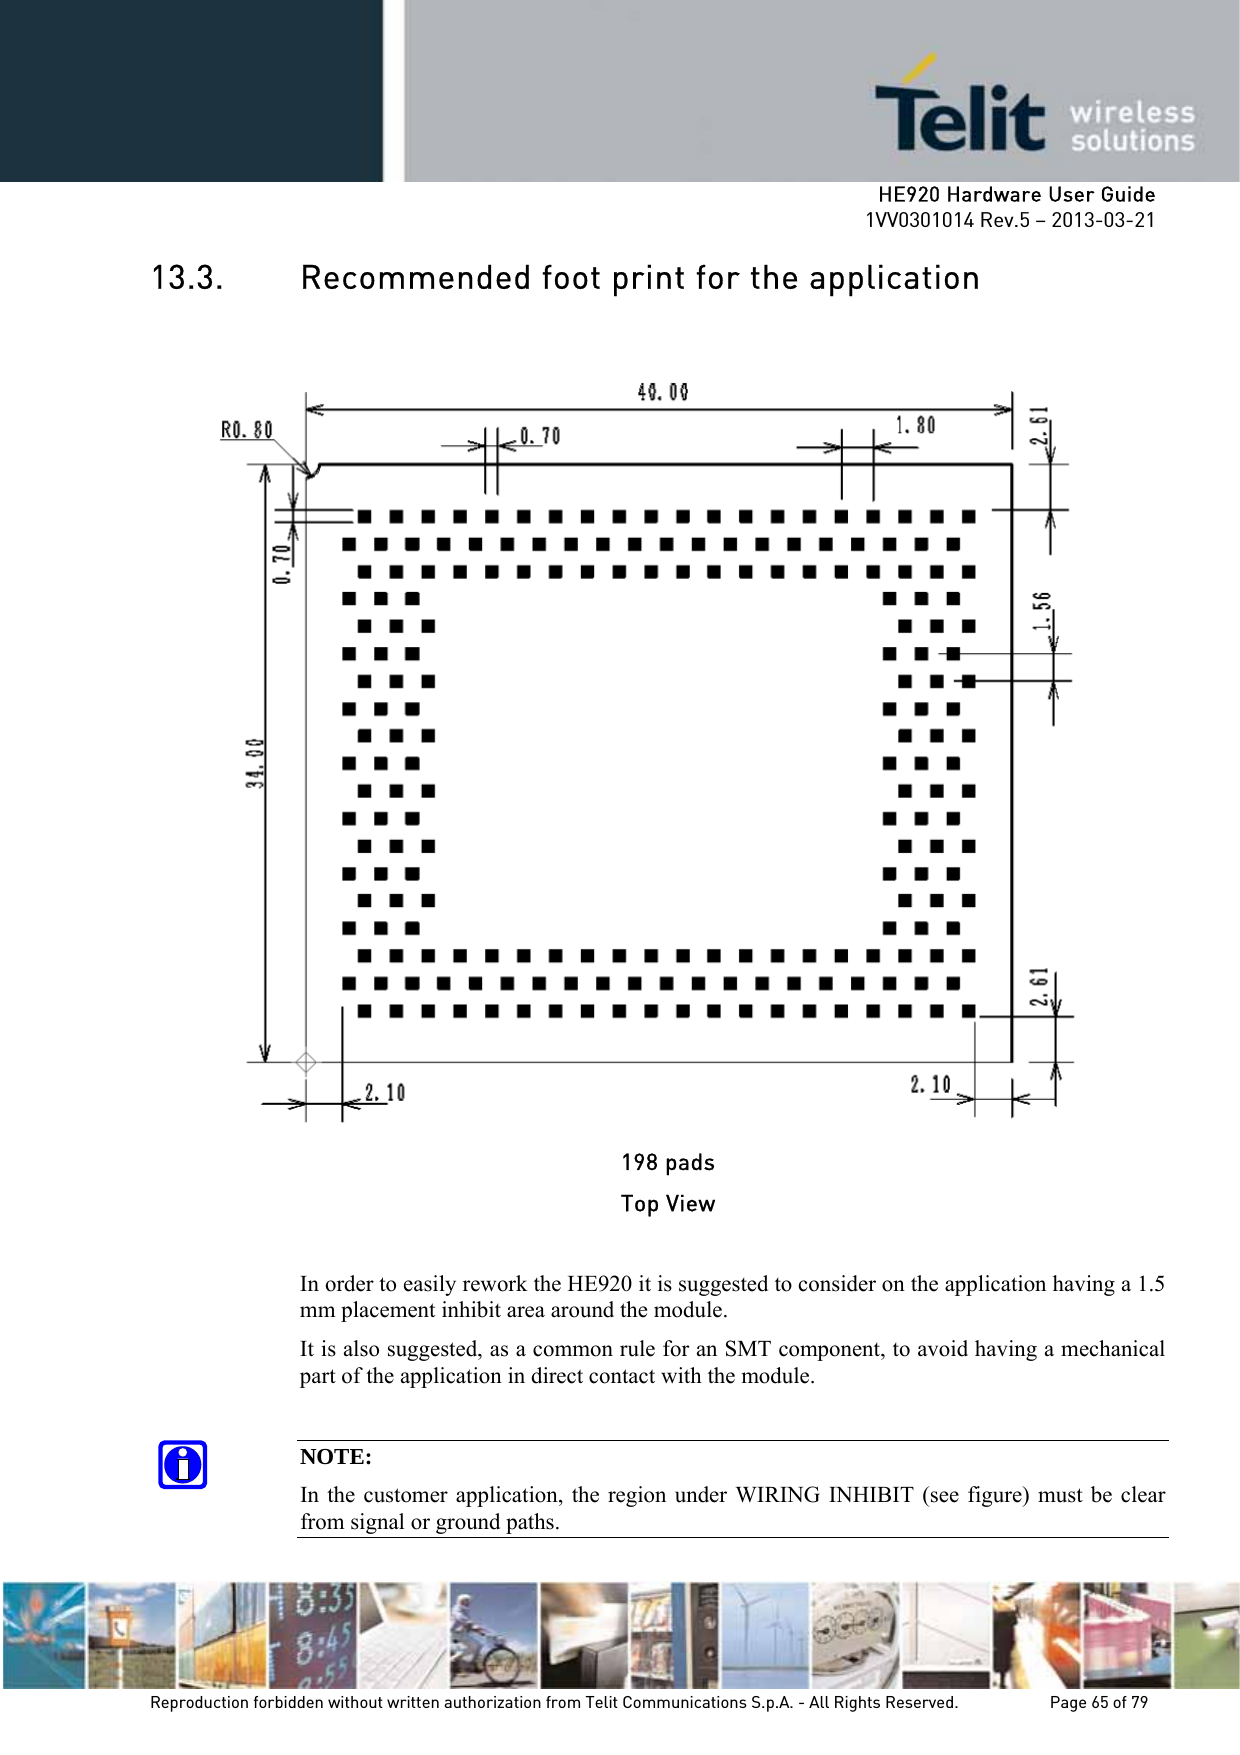     HE920 Hardware User Guide 1VV0301014 Rev.5 – 2013-03-21 Reproduction forbidden without written authorization from Telit Communications S.p.A. - All Rights Reserved.    Page 65 of 79  13.3. Recommended foot print for the application    198 pads Top View  In order to easily rework the HE920 it is suggested to consider on the application having a 1.5 mm placement inhibit area around the module.  It is also suggested, as a common rule for an SMT component, to avoid having a mechanical part of the application in direct contact with the module.  NOTE: In the customer application, the region under WIRING INHIBIT (see figure) must be clear from signal or ground paths. 